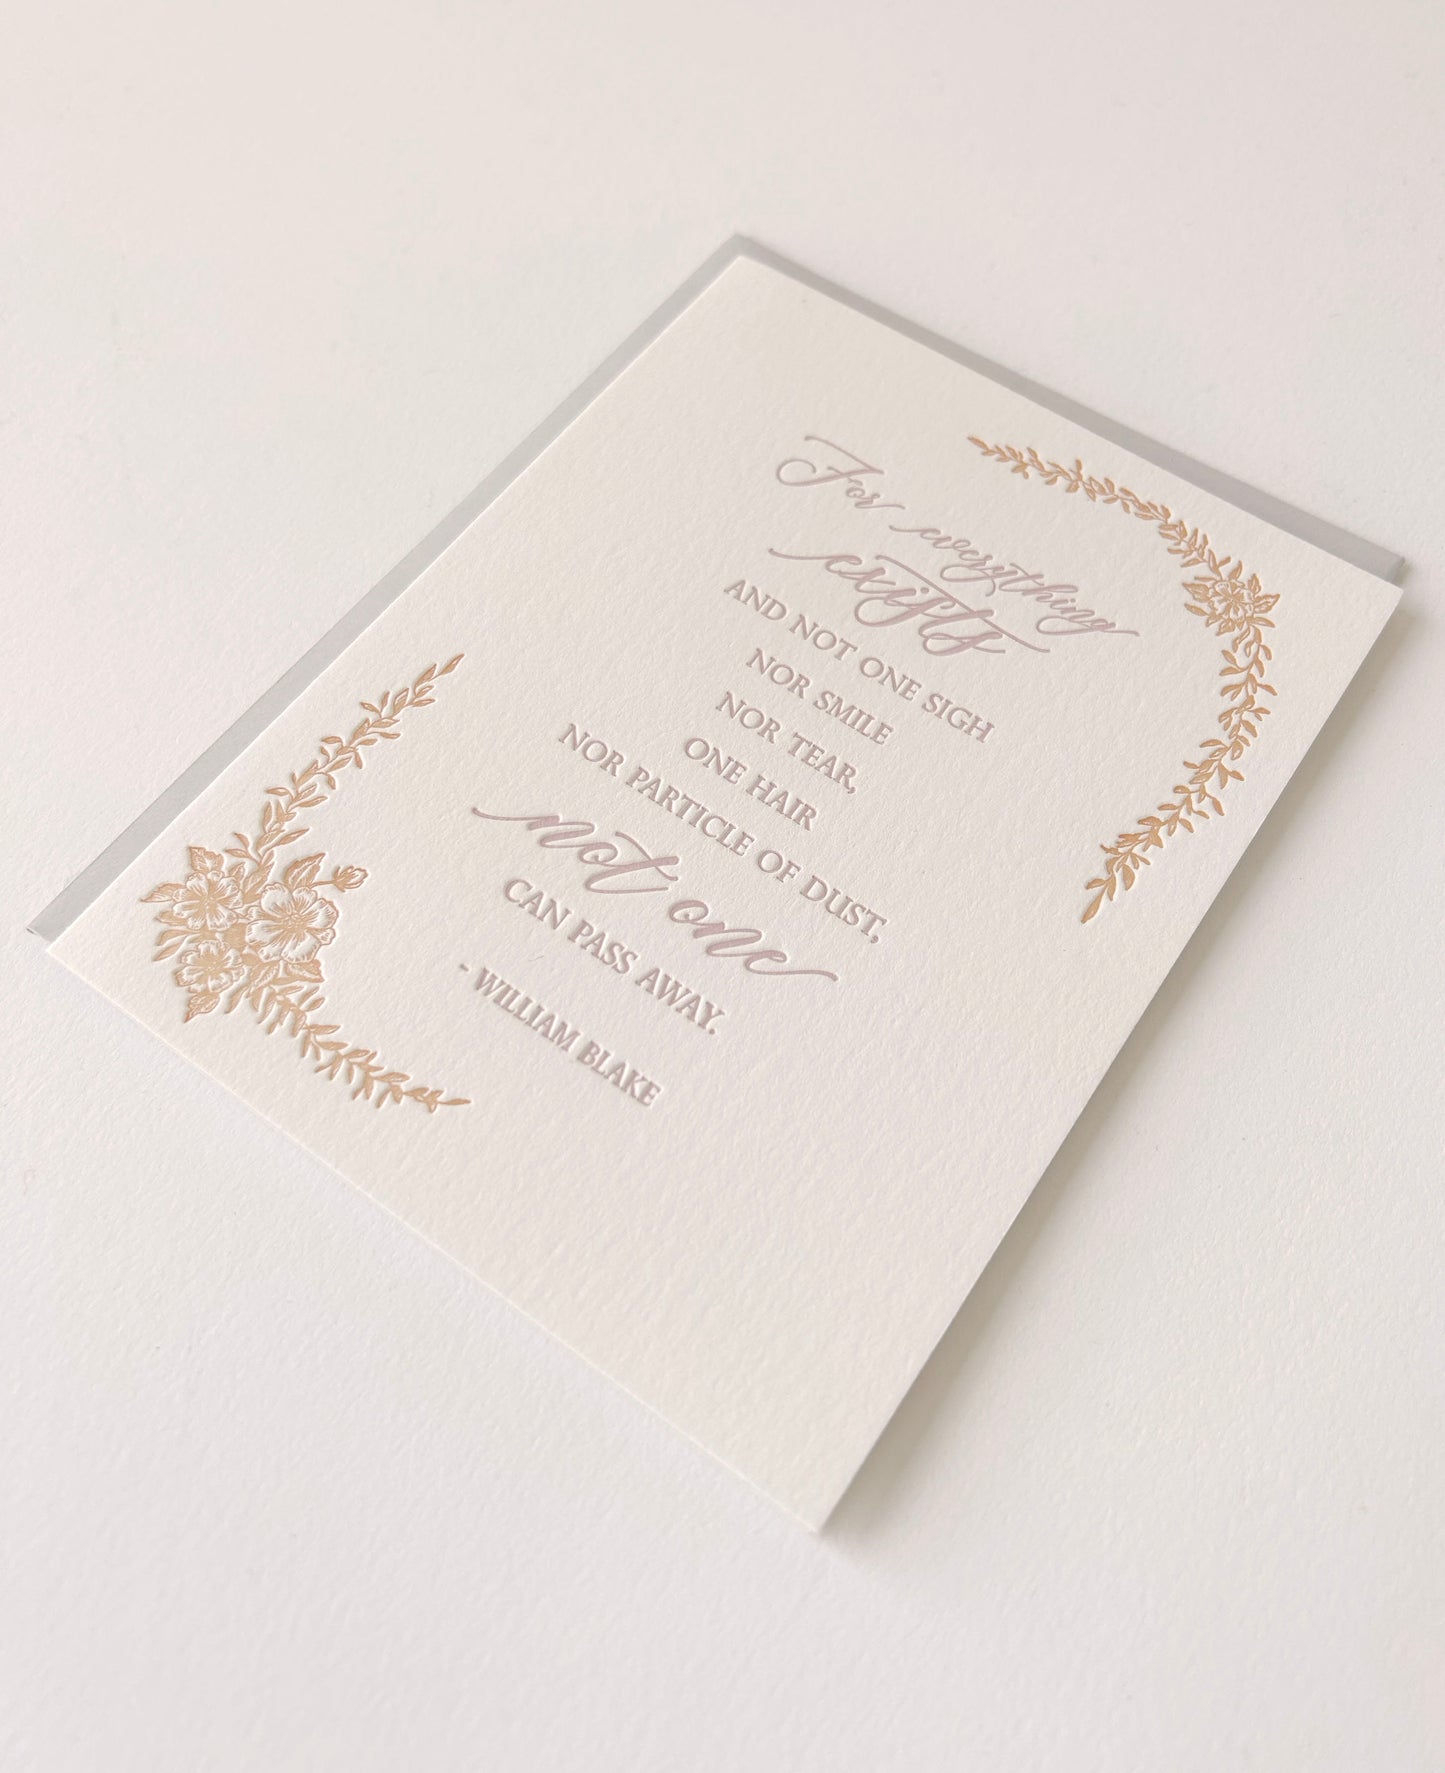 Letterpress sympathy card with florals that says "For everything exists and not one sigh nor smile nor tear one hair nor particle of dust, not one can pass away.- William Blake" by Rust Belt Love